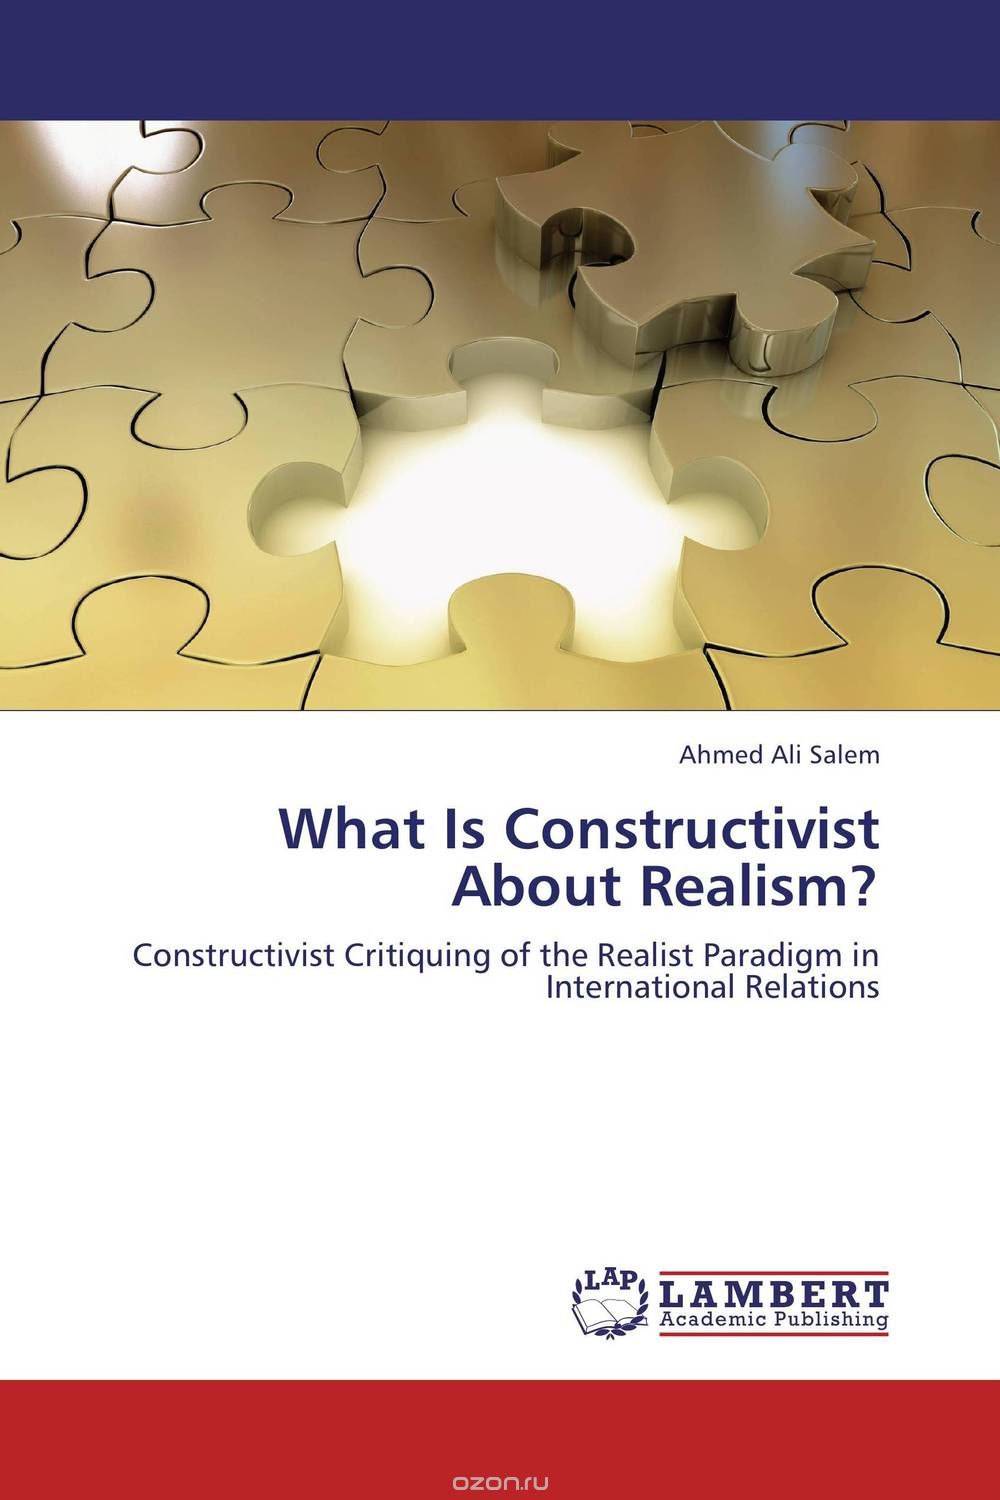 What Is Constructivist About Realism?